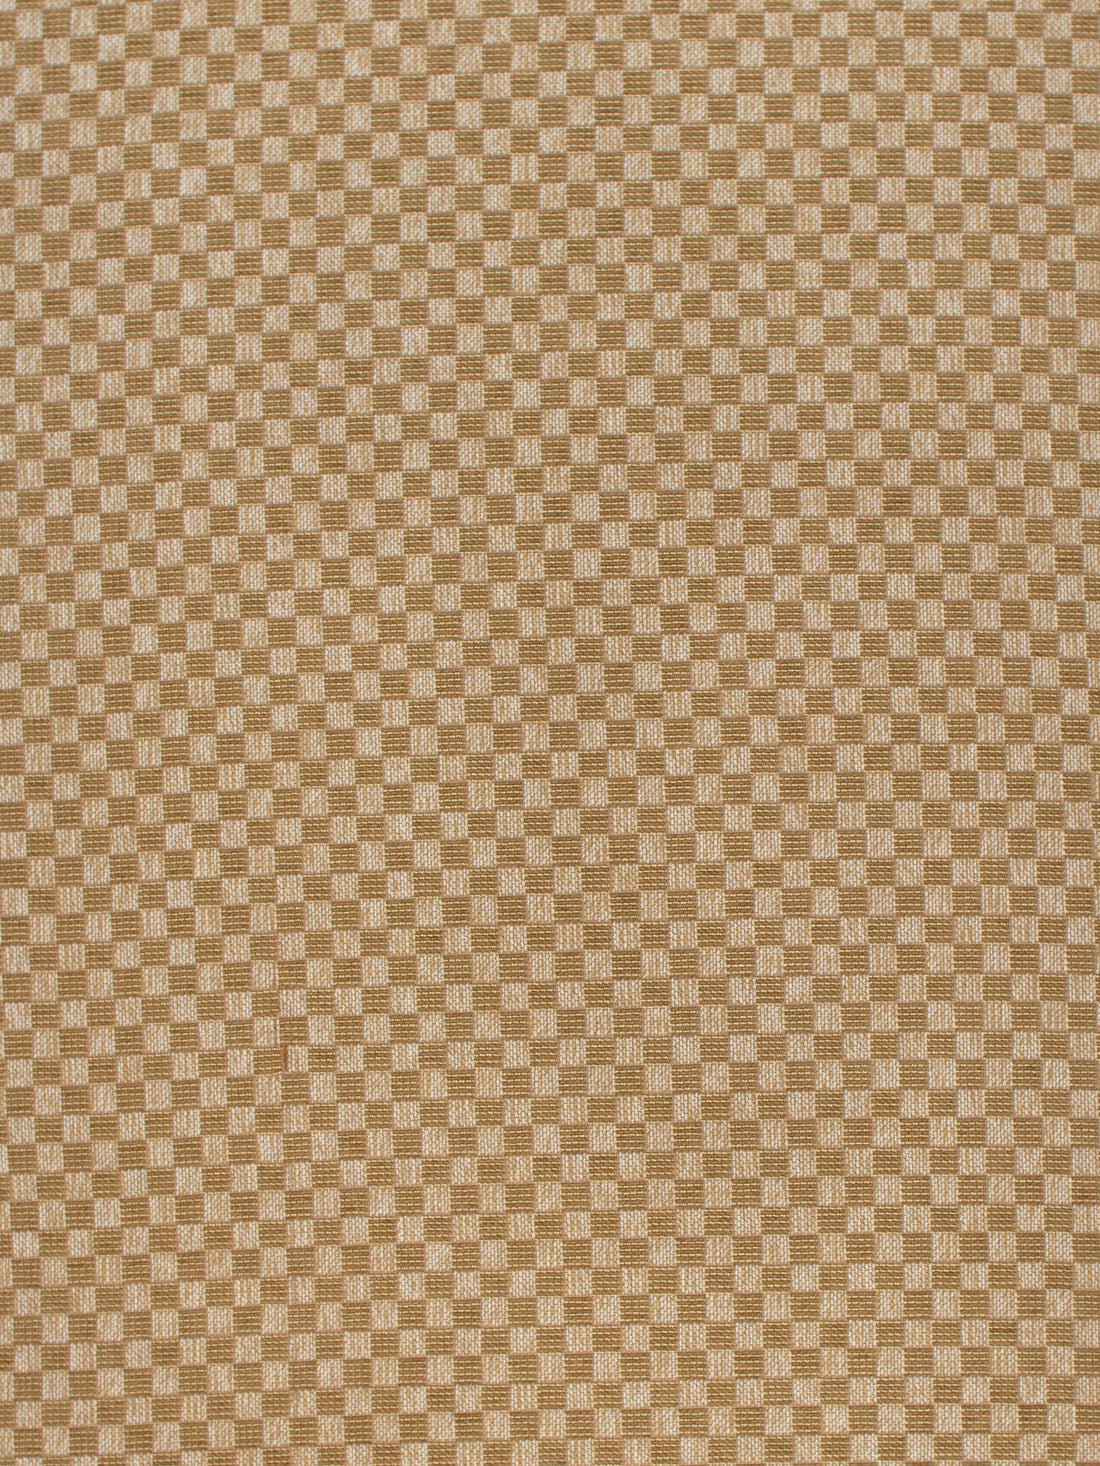 Parke fabric in mushroom color - pattern number HR 10062001 - by Scalamandre in the Old World Weavers collection